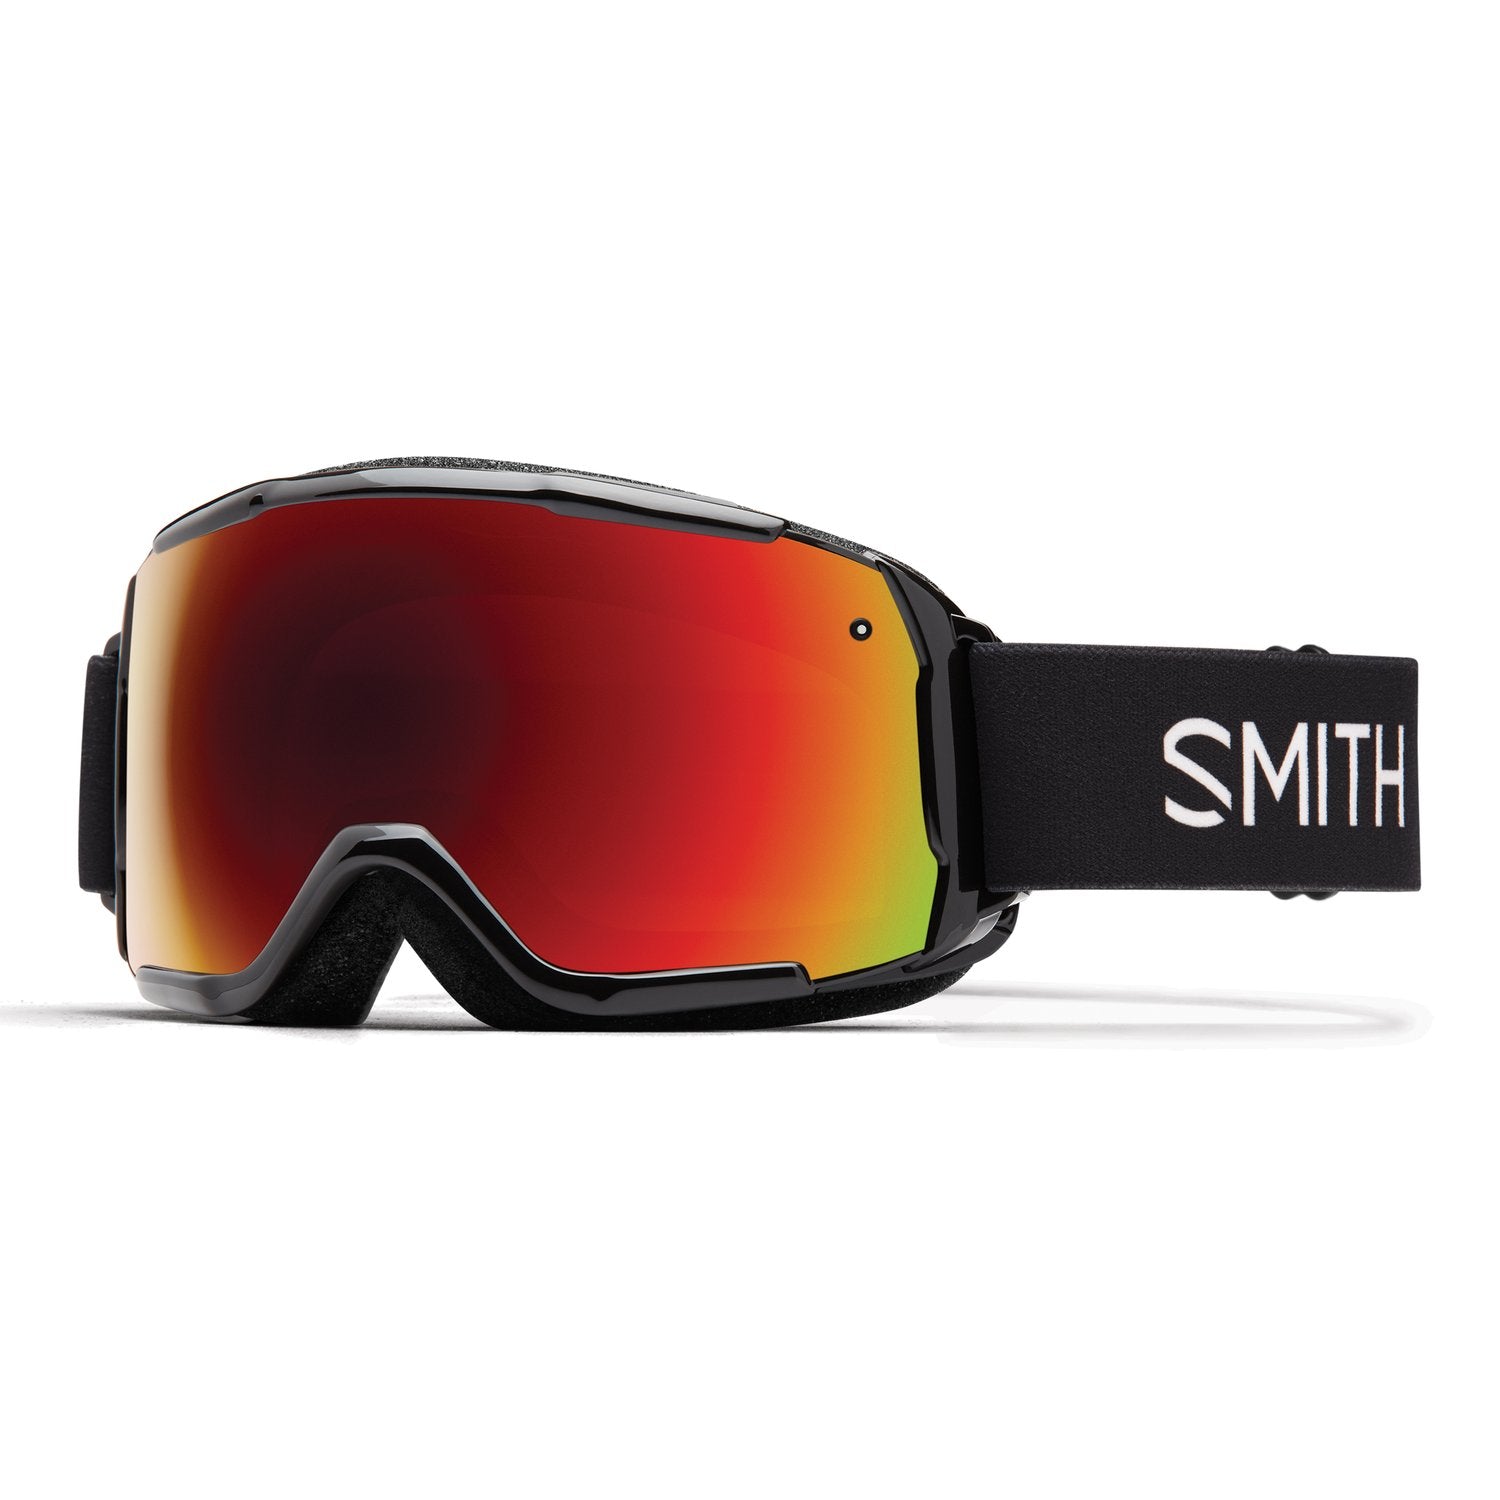 Smith Kids' Grom Snow Goggle Black Red Sol-X Mirror Snow Goggles